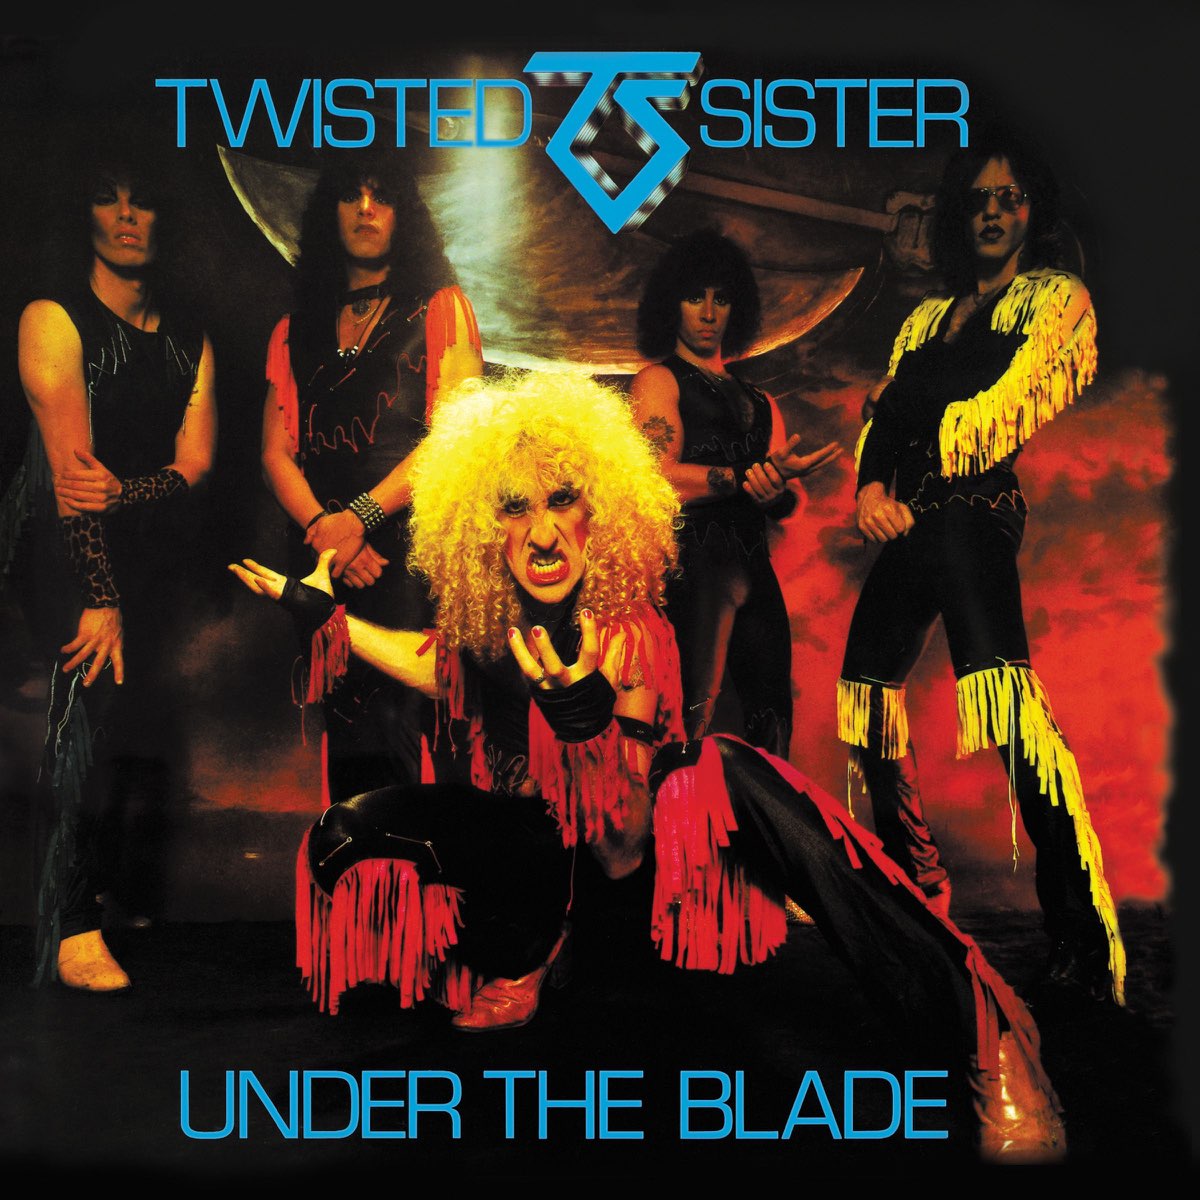 Under the Blade - Album by Twisted Sister - Apple Music